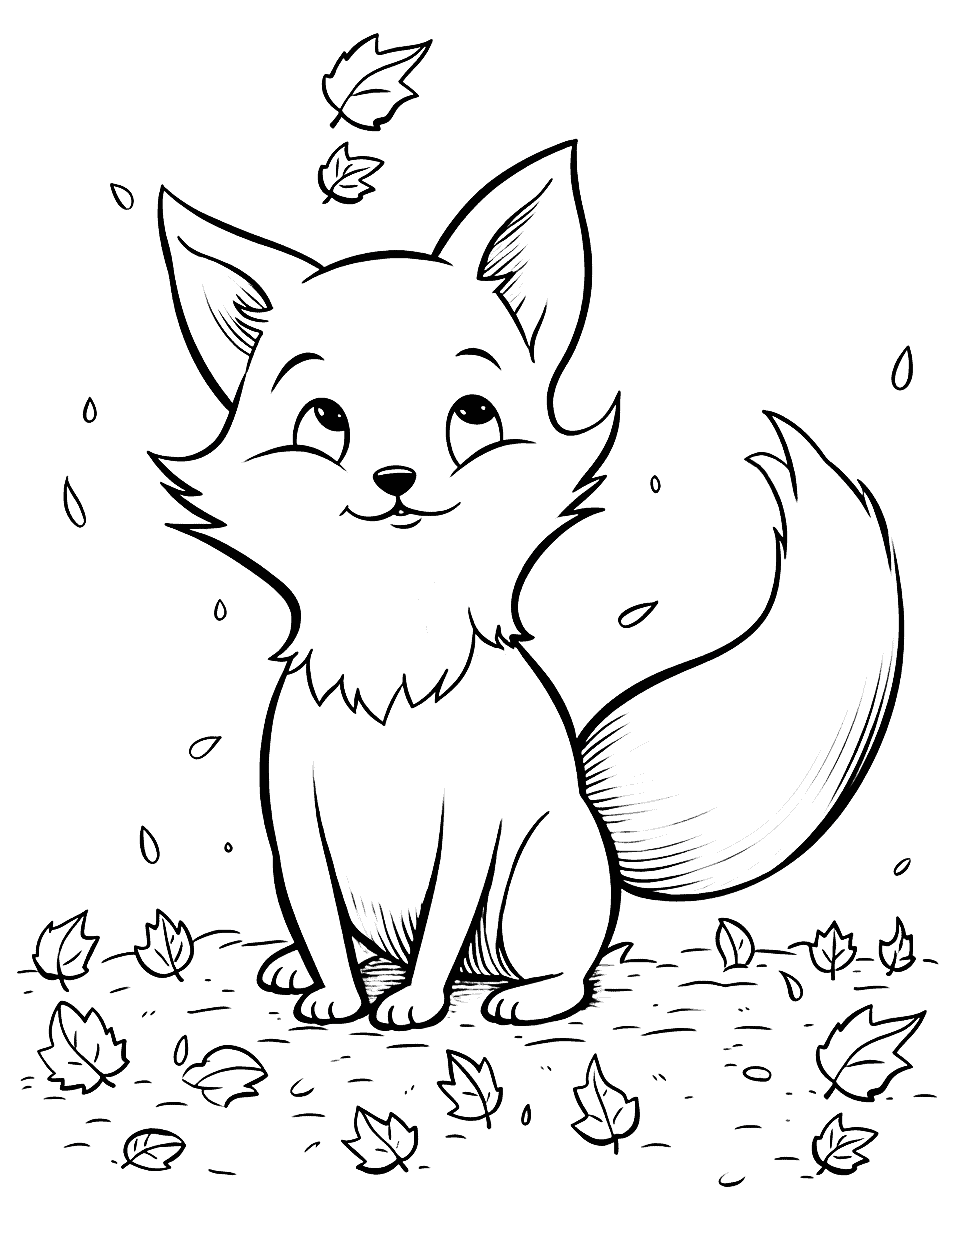 Fox's Autumn Leaf Dance Fox Coloring Page - A fox playing amidst falling autumn leaves.